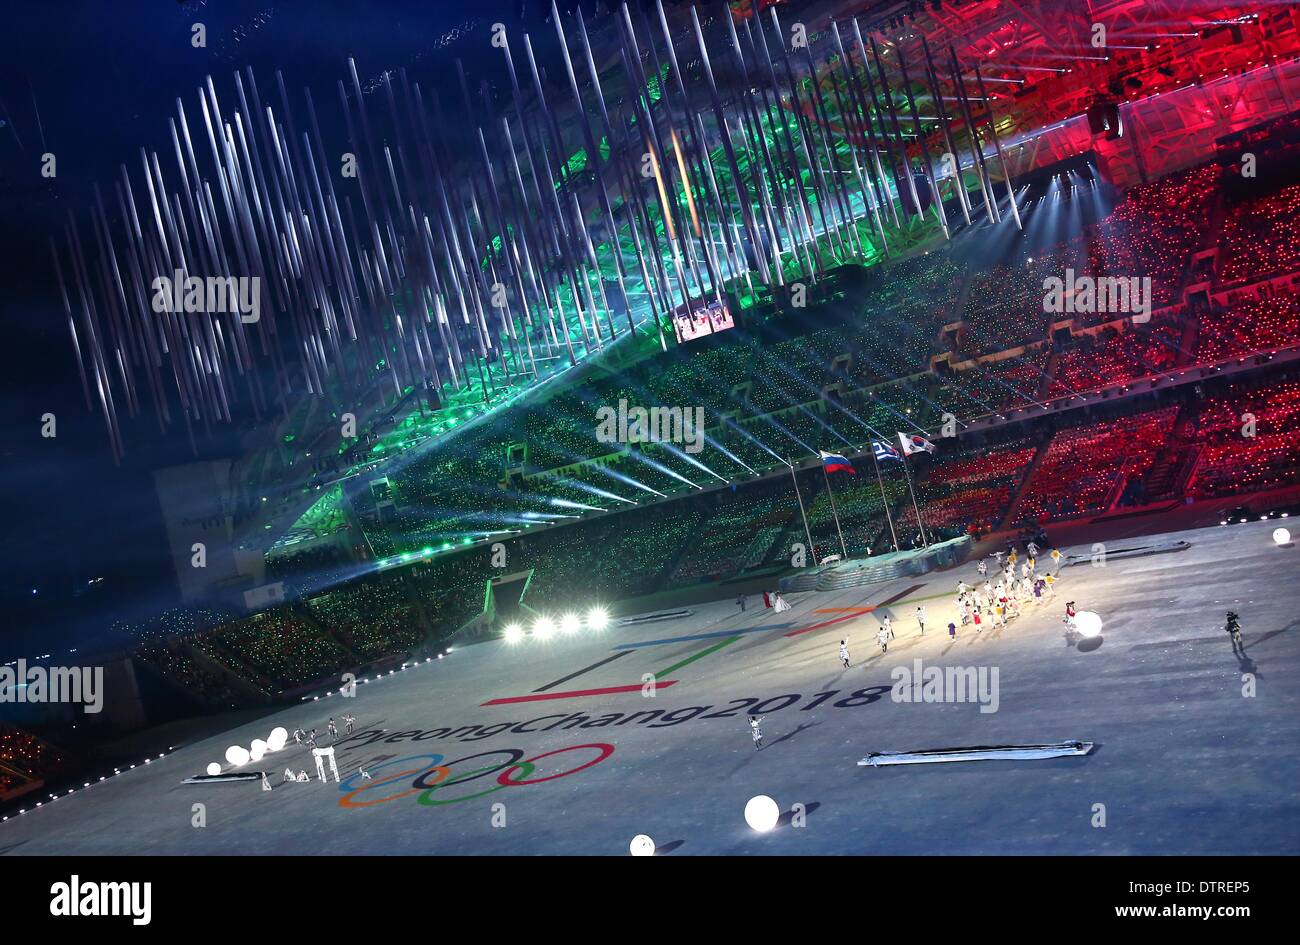 Sochi, Russia. 23rd February 2014. A general view as 'See You In PyeongChang' is projected after the handing over ceremony to the city of PyeongChang during the Closing Ceremony in Fisht Olympic Stadium at the Sochi 2014 Olympic Games, Sochi, Russia, 23 February 2014. PyeongChang is host of the 2018 Olympic Winter Games. Photo: Daniel Karmann/dpa/Alamy Live News Stock Photo